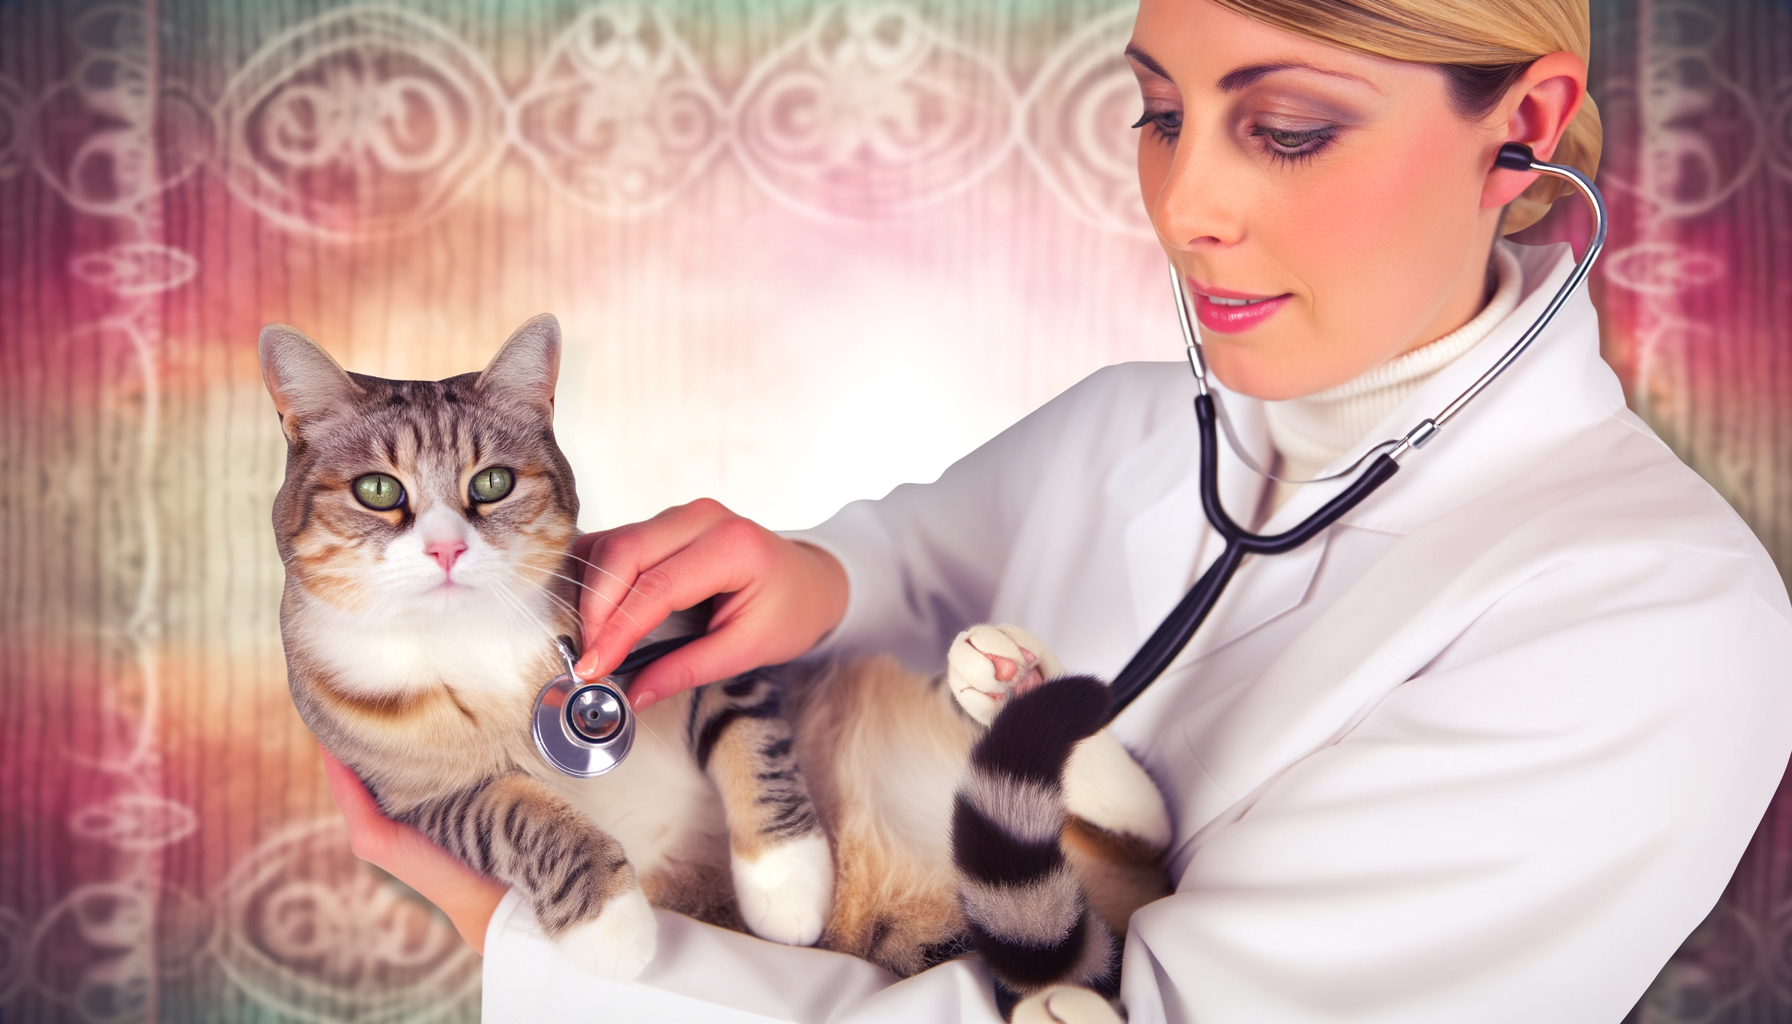 "Debunking Myths: The Impact of Cats on Human Health"